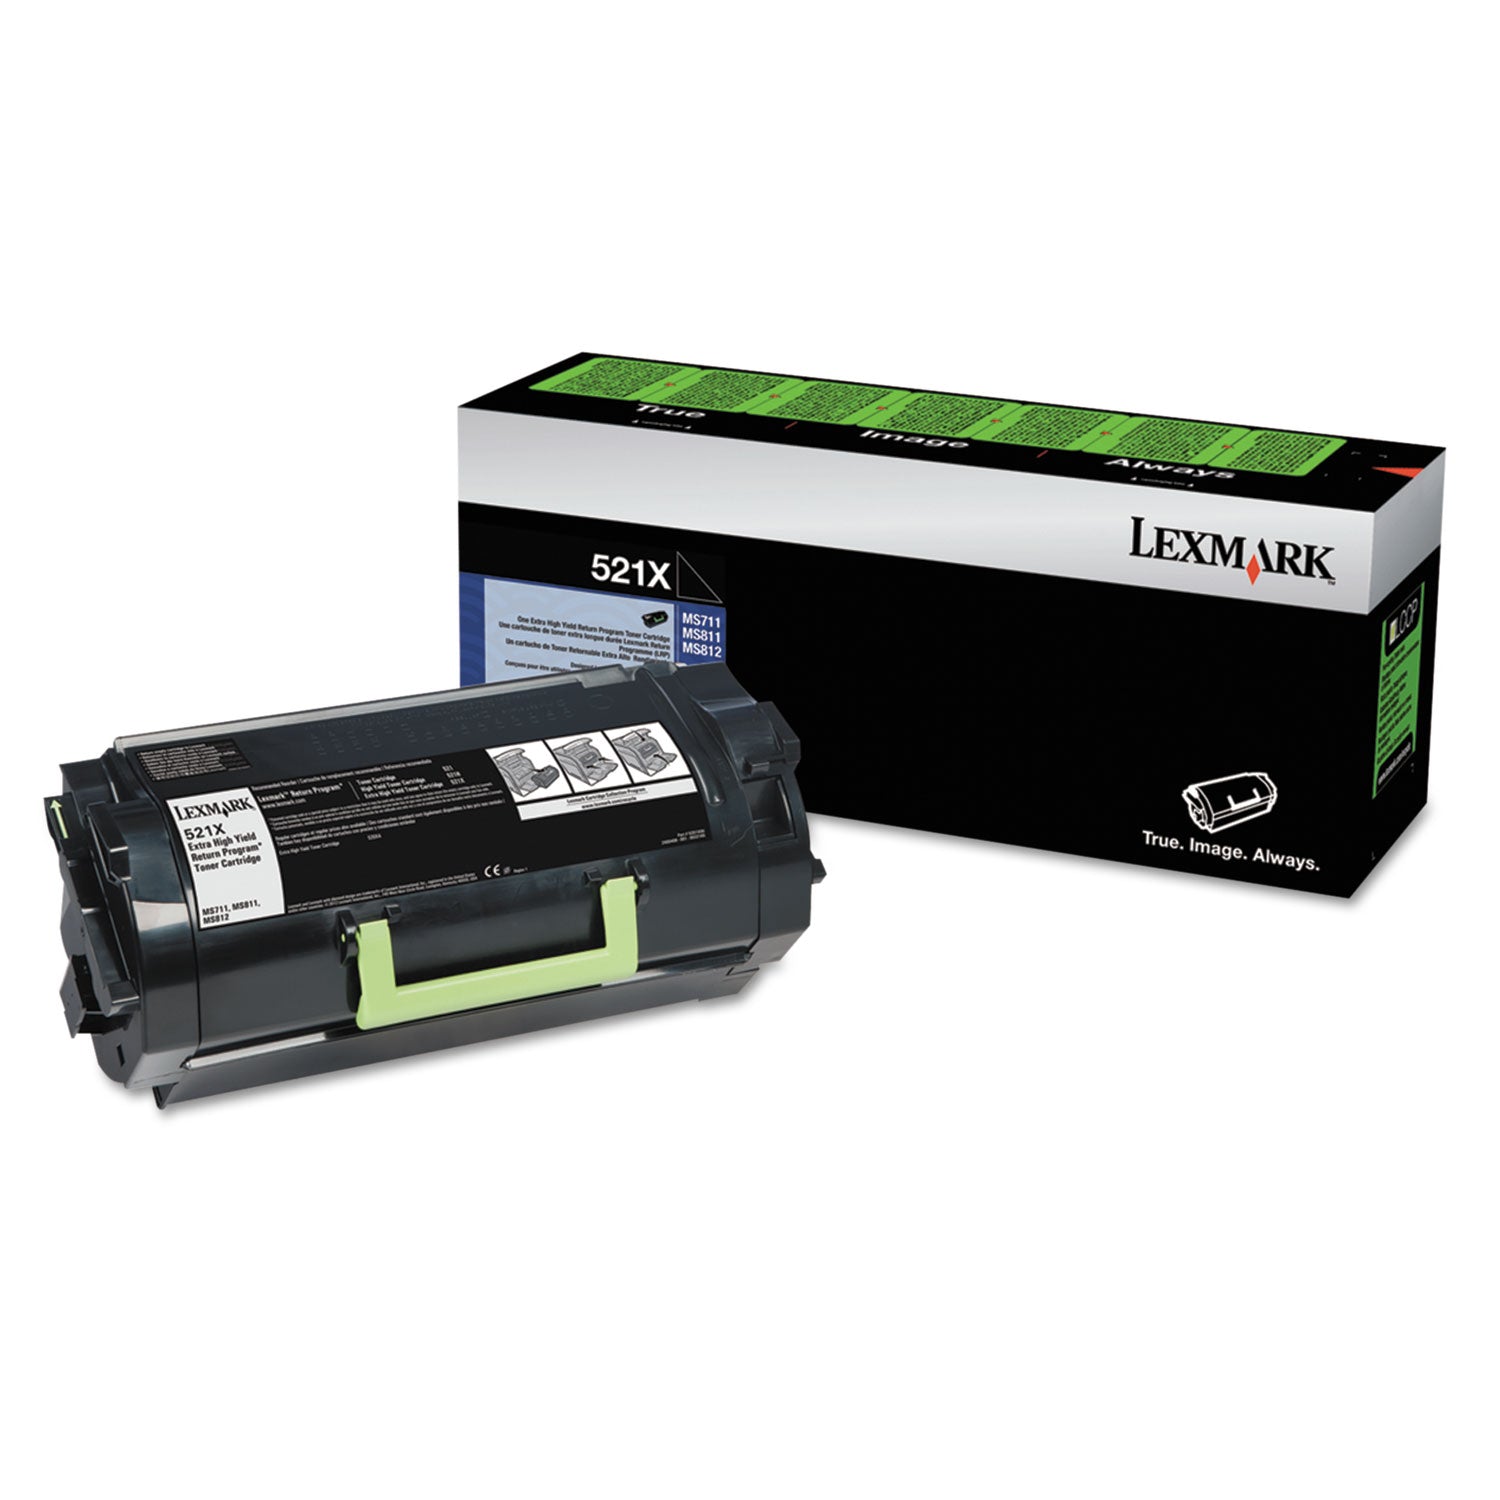 52D1X00 Extra High-Yield Toner, 45,000 Page-Yield, Black - 